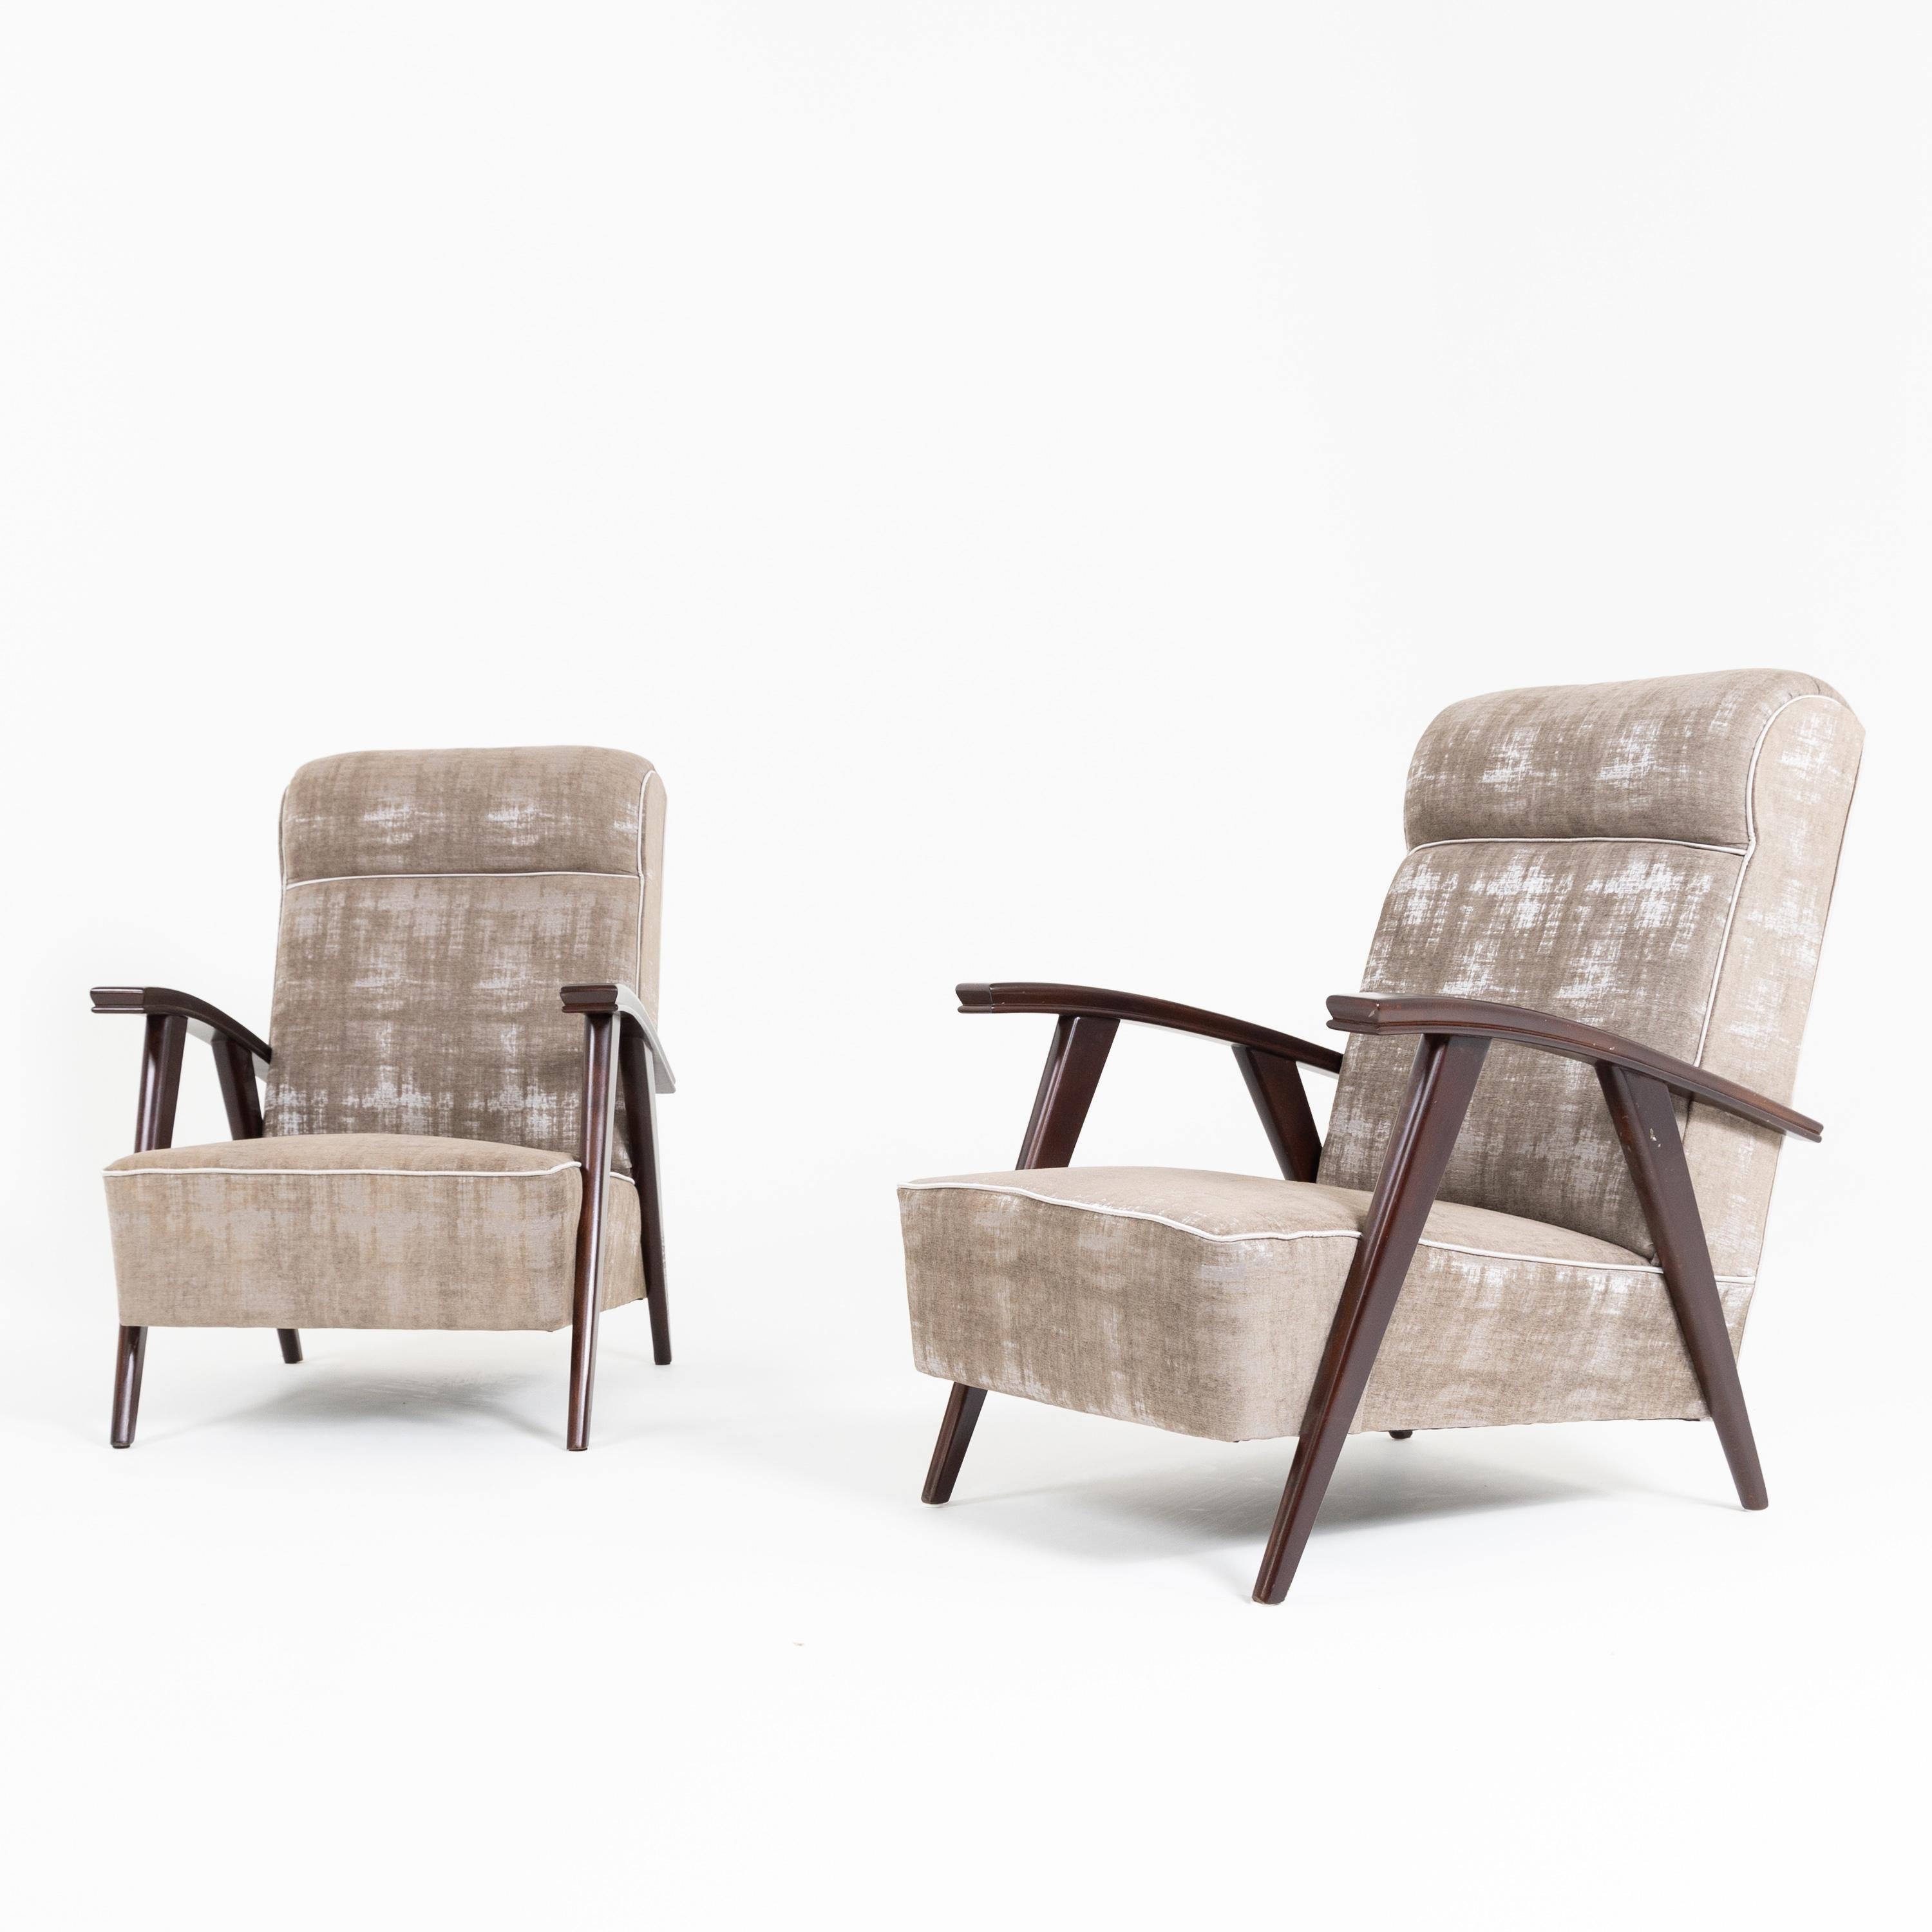 Pair of modernist armchairs attributed to Jacques Adnet.
Stained beechwood.